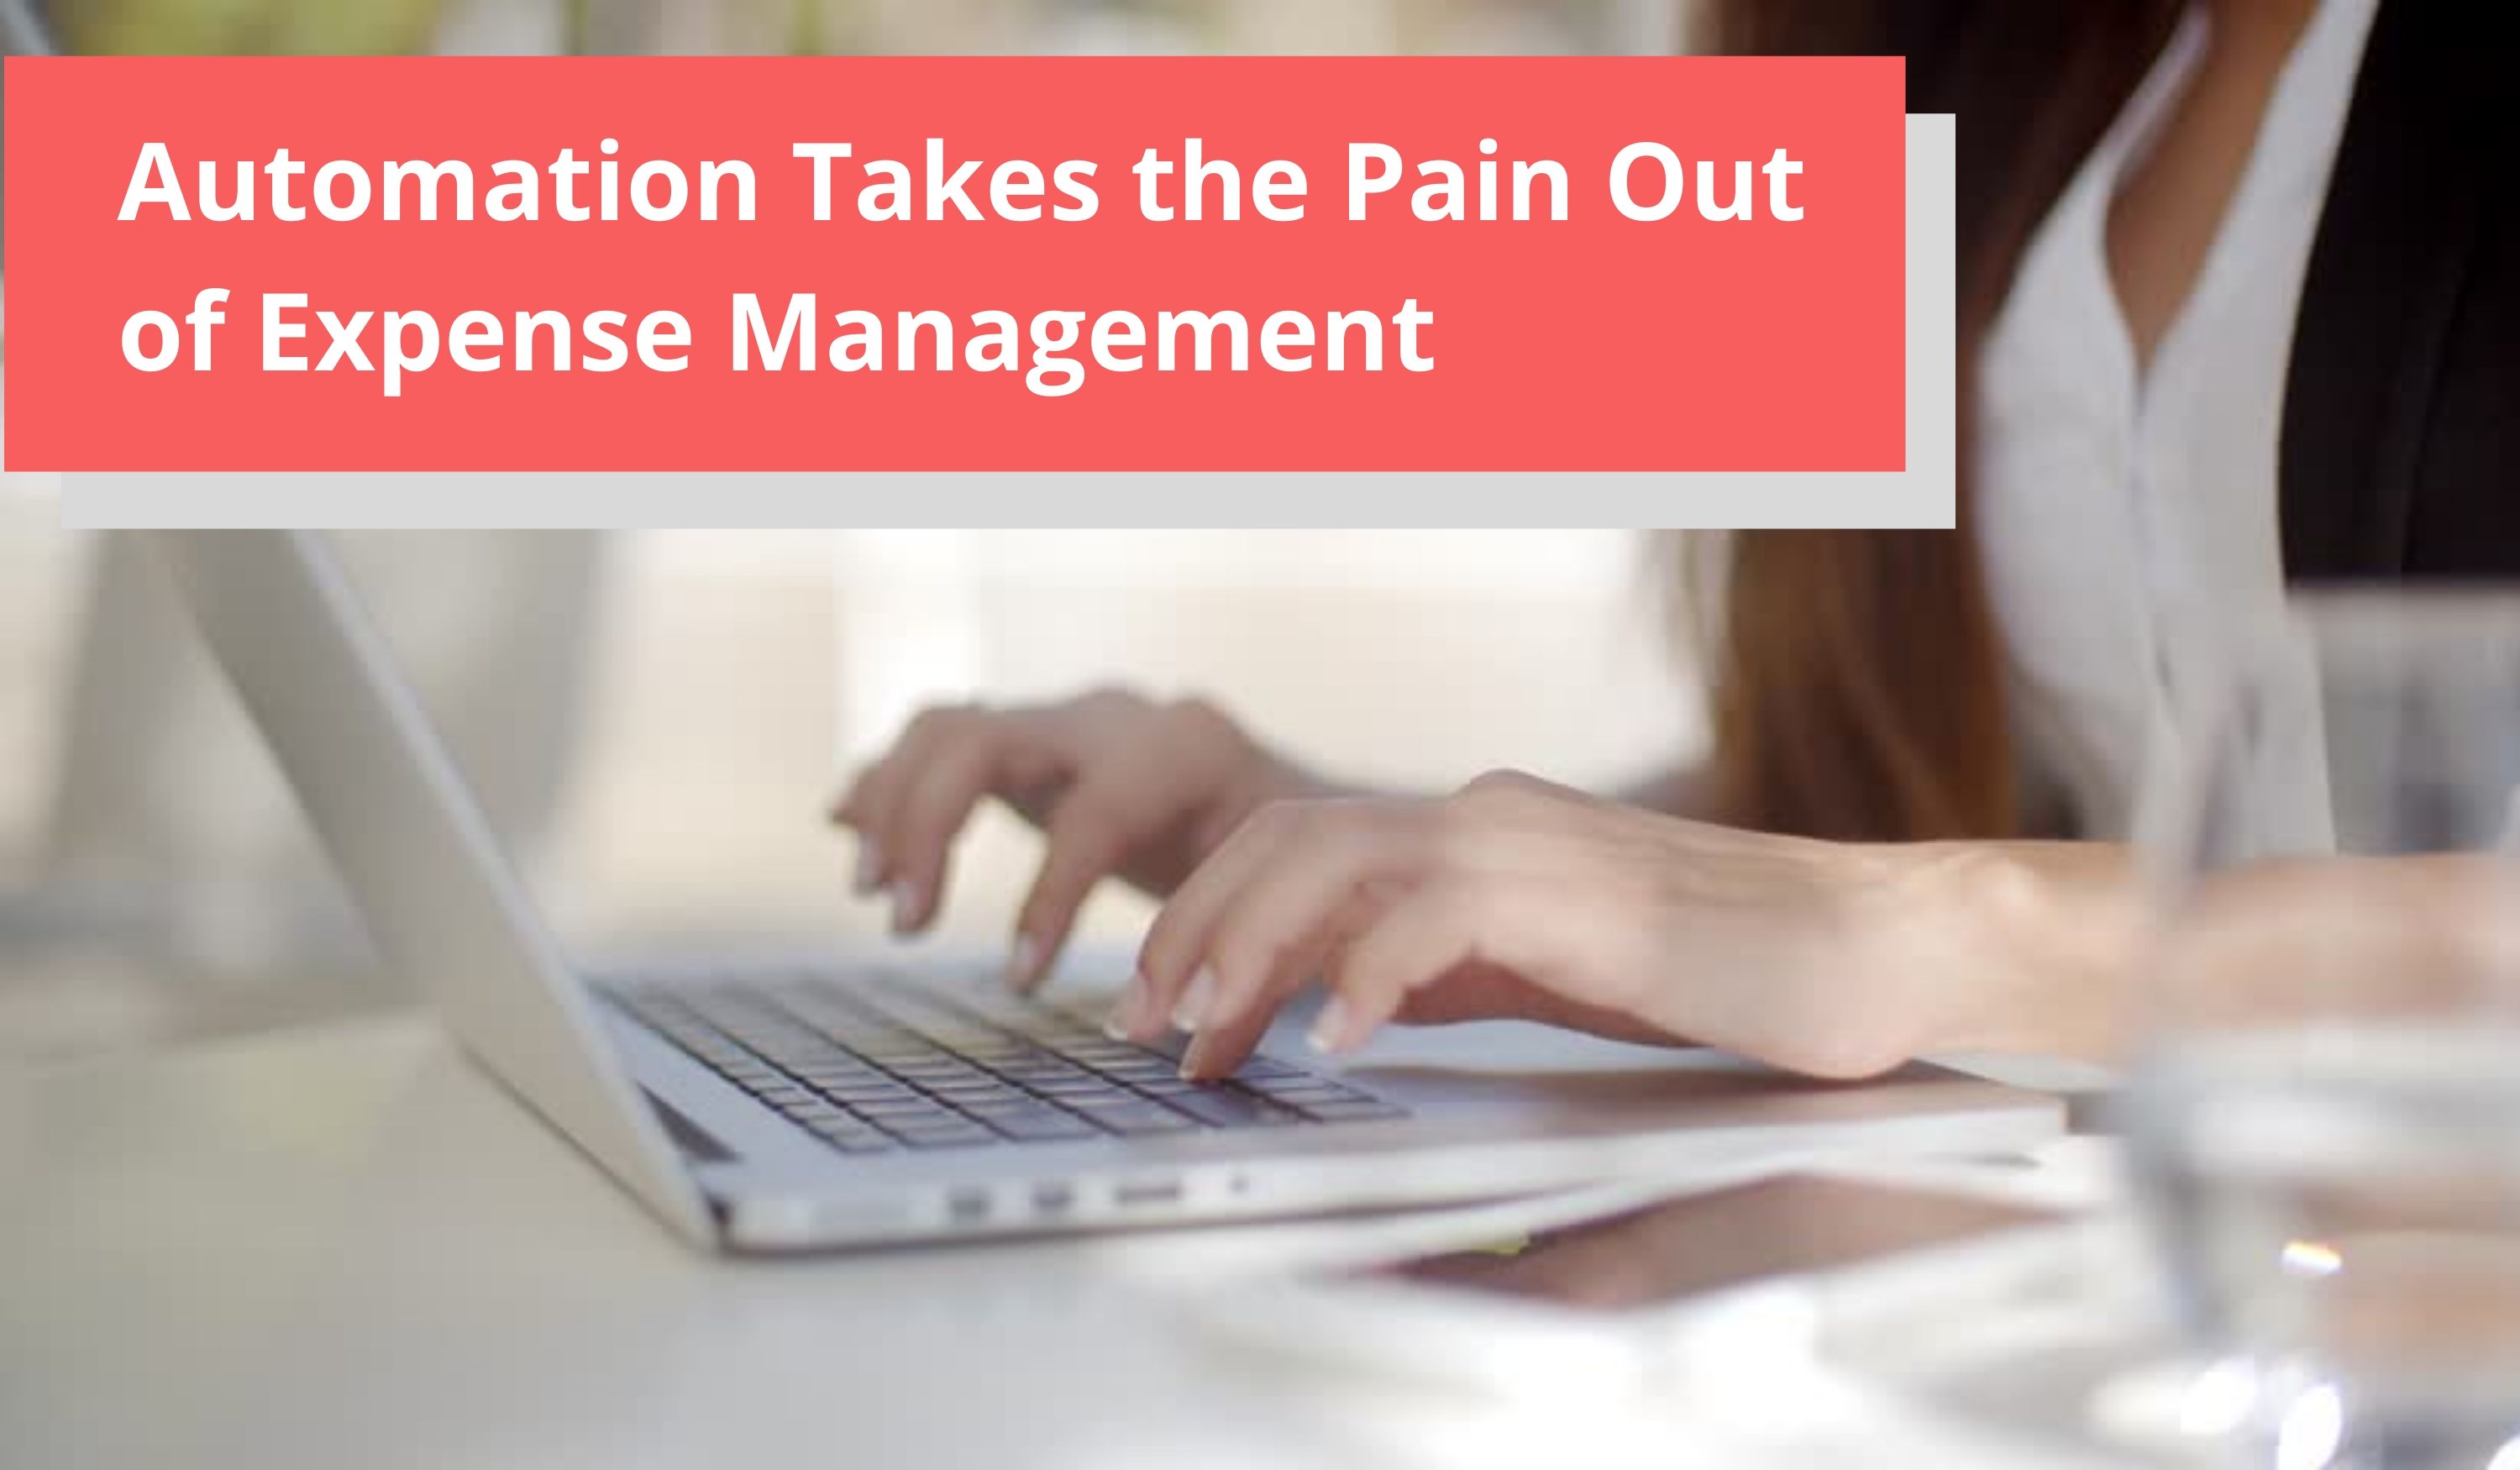 Automation Takes the Pain Out of Expense Management